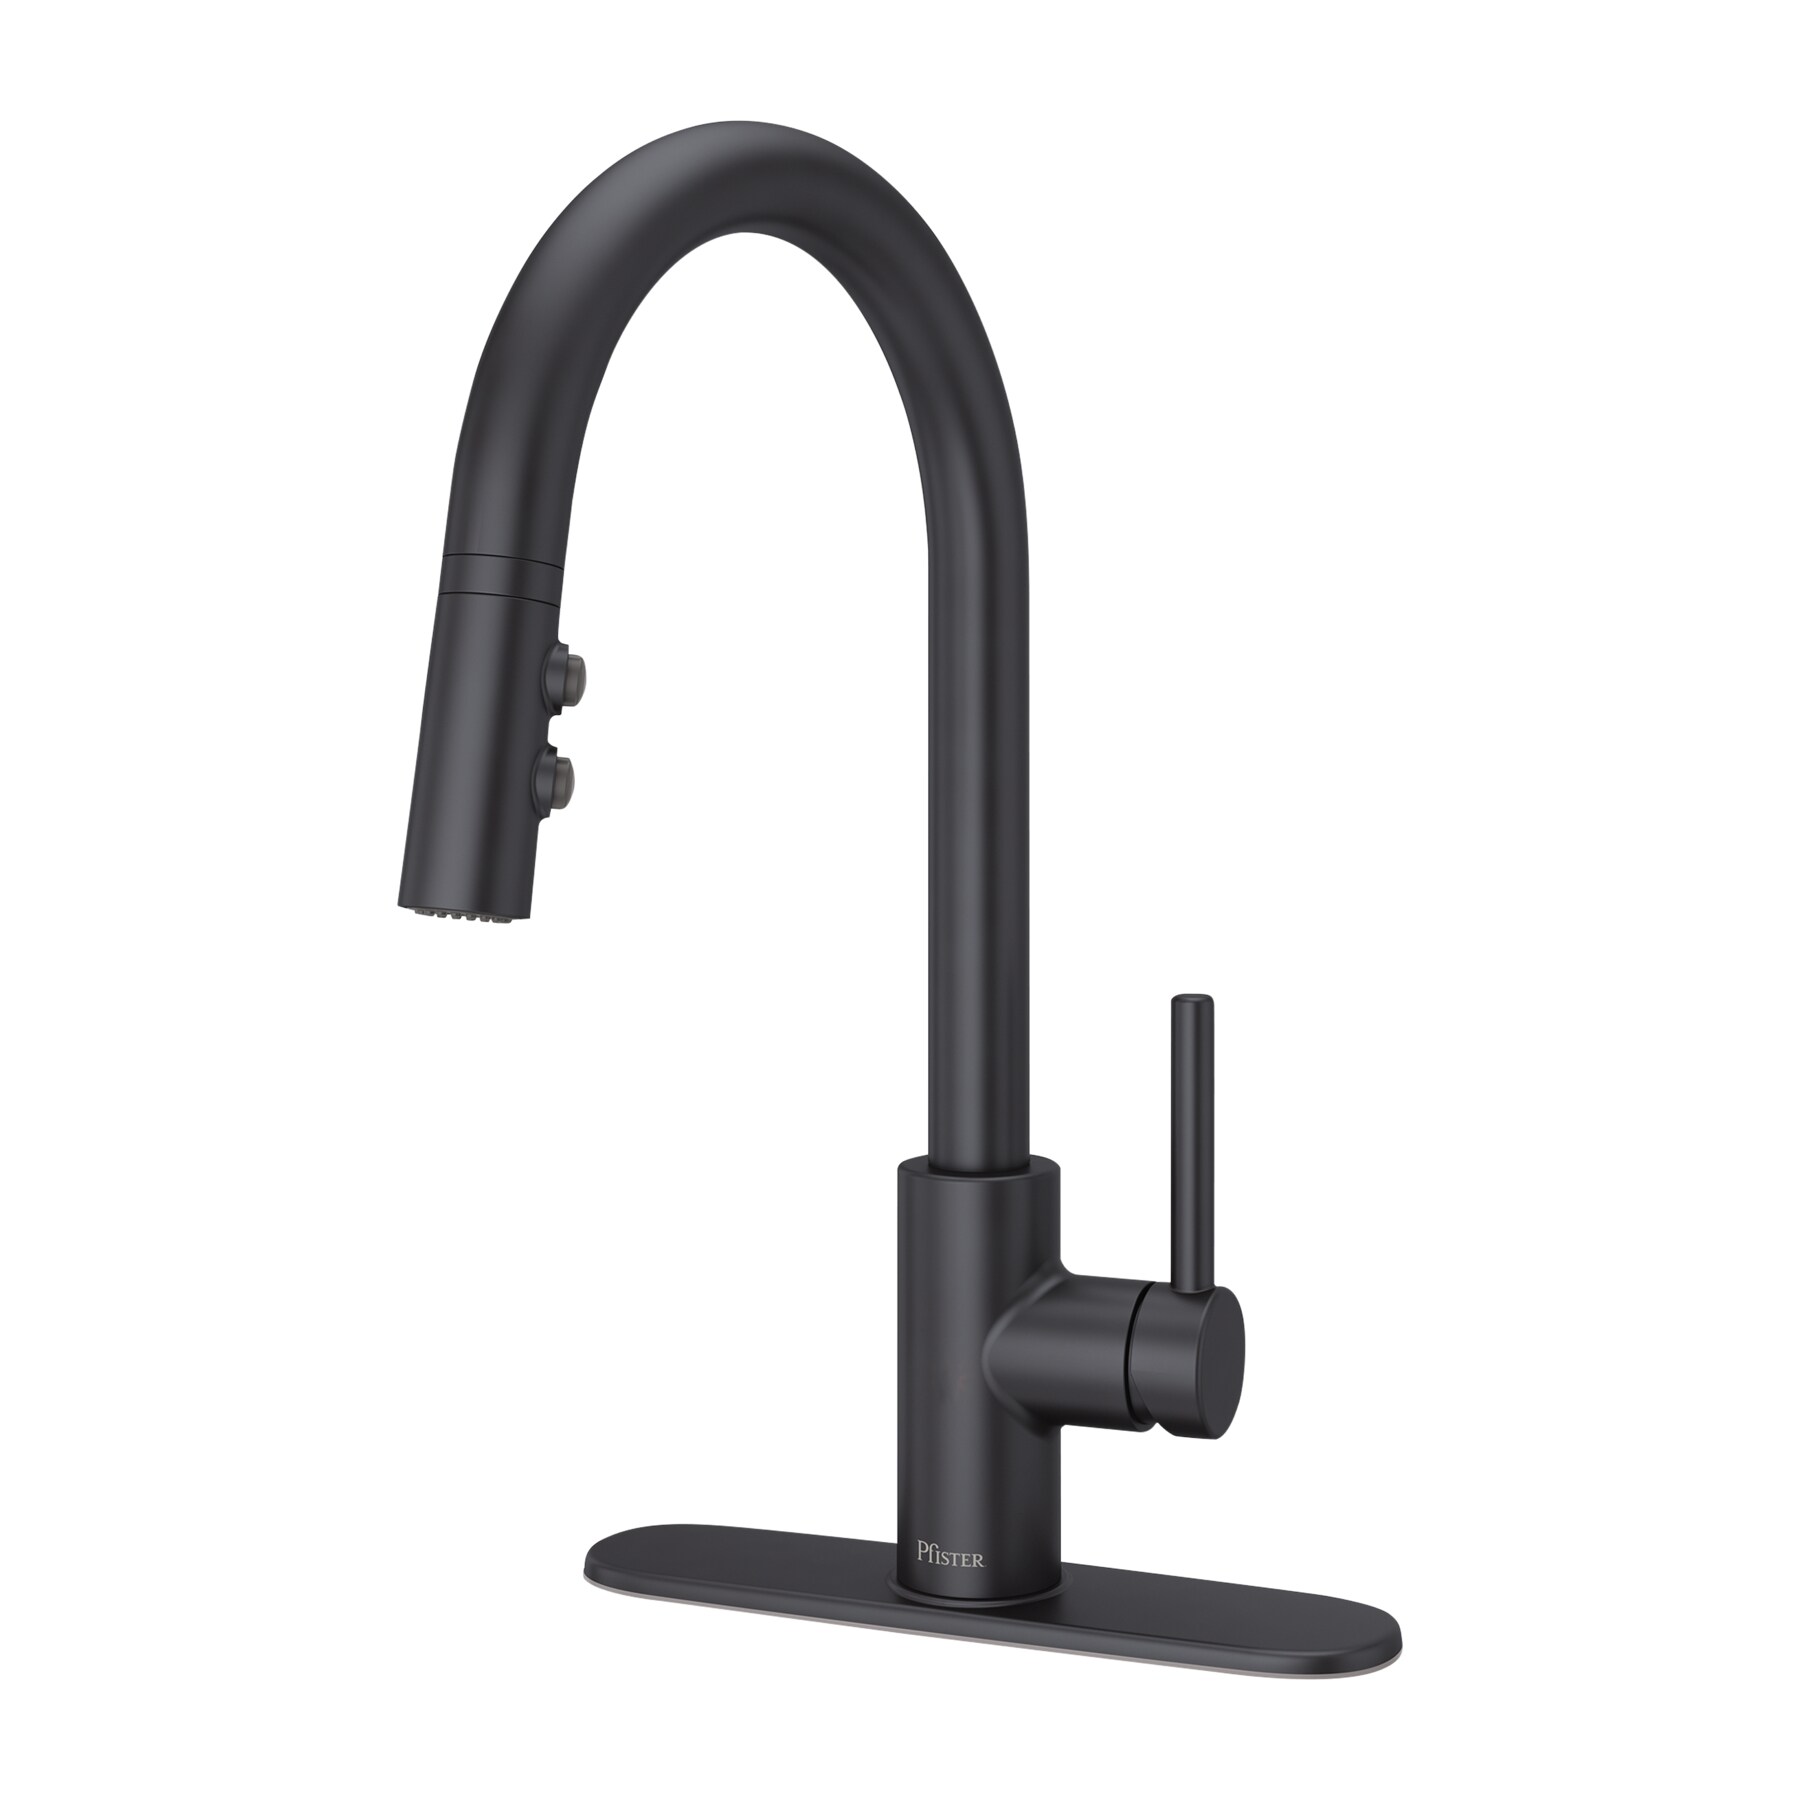 Pfister Stellen Black Single Handle Pull-down Kitchen Faucet with ...